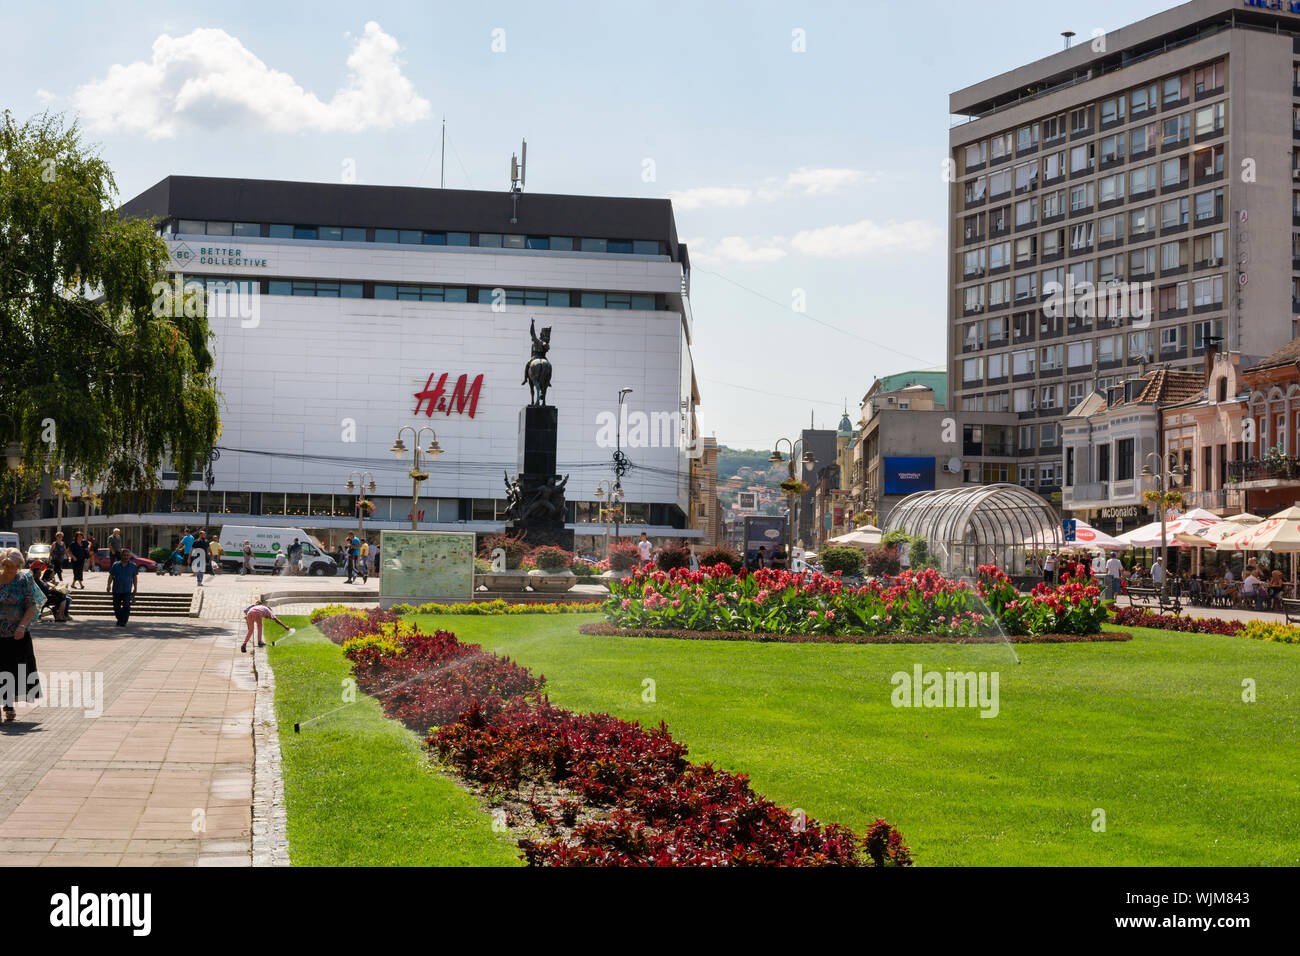 Nis, Serbia - August 28, 2019: Big public park with green lawn and flowers  in city downtown with a promenade on summer sunny day in the city of Nis  Stock Photo - Alamy